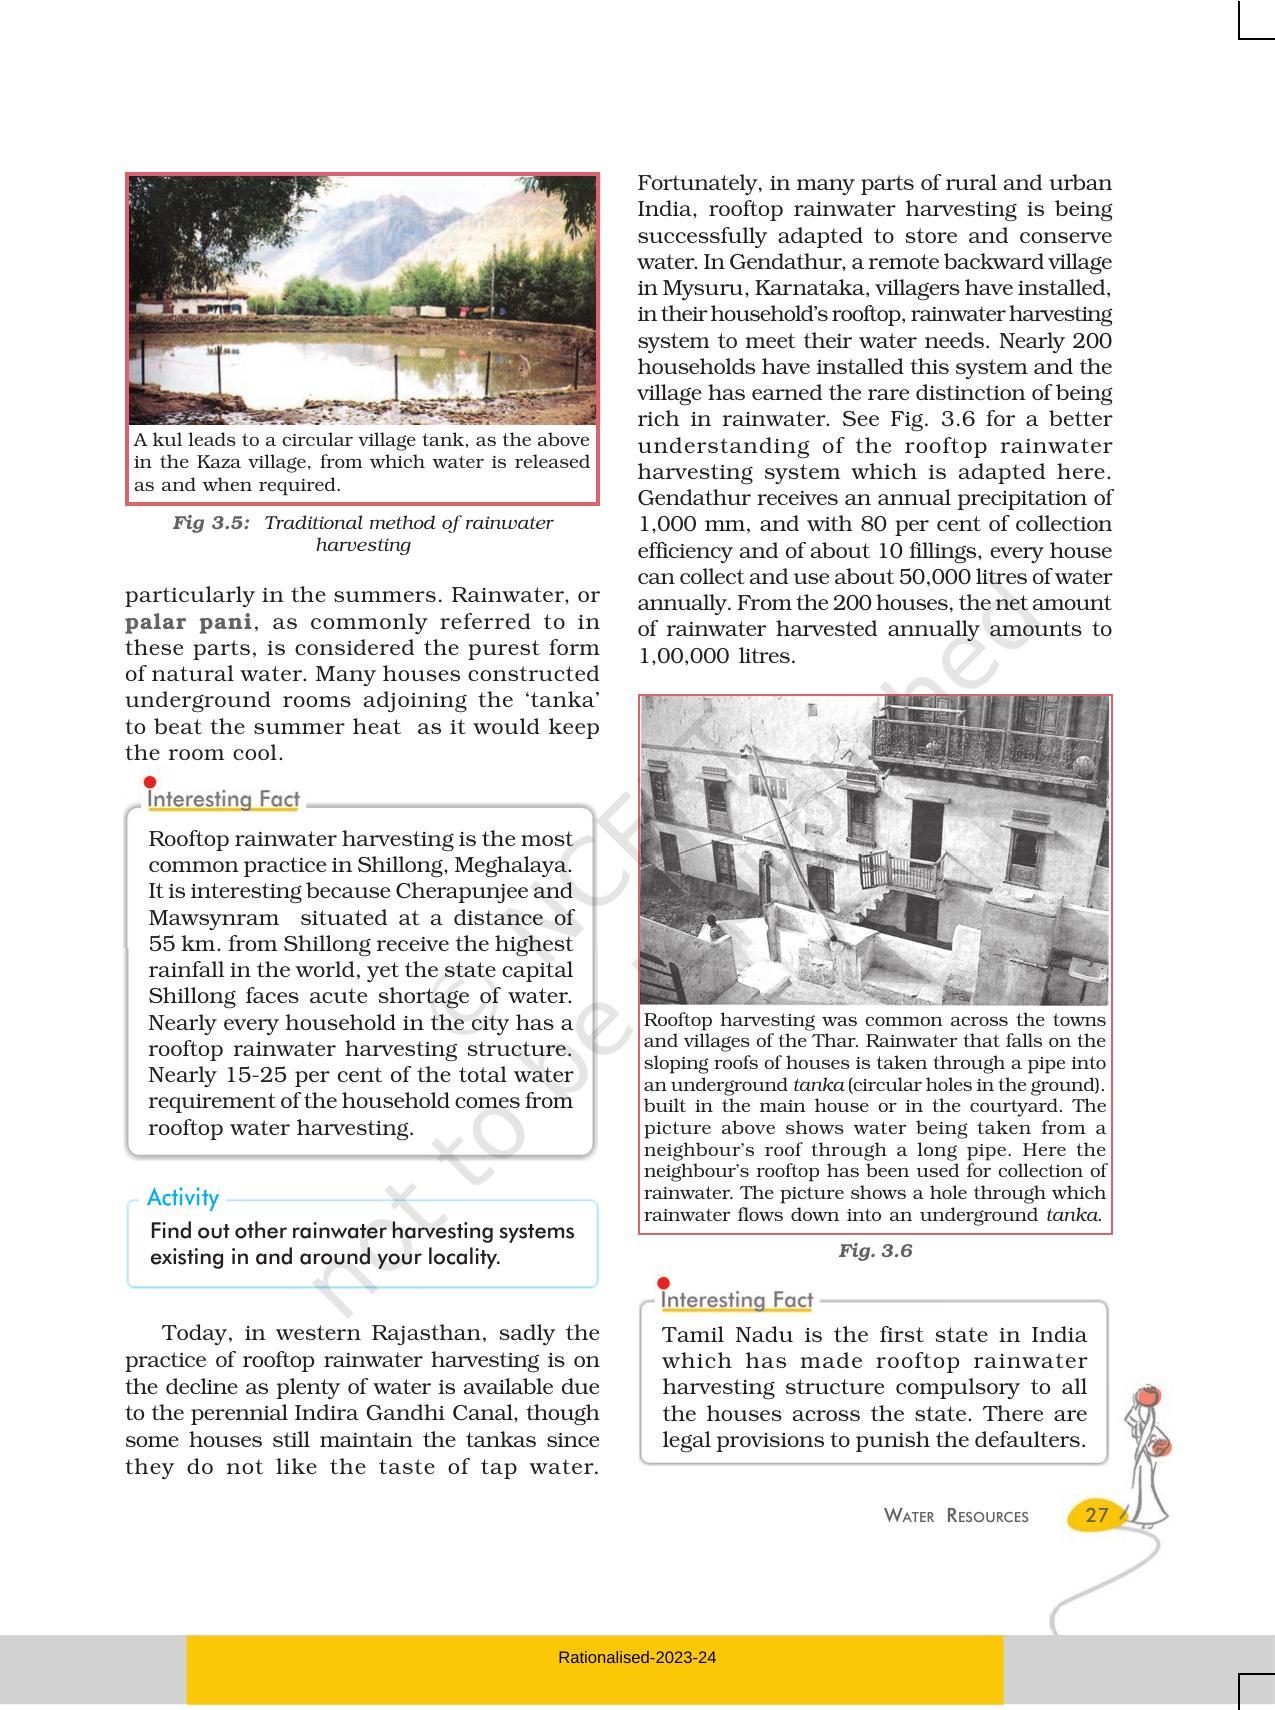 NCERT Book for Class 10 Geography Chapter 3 Water Resources - Page 9